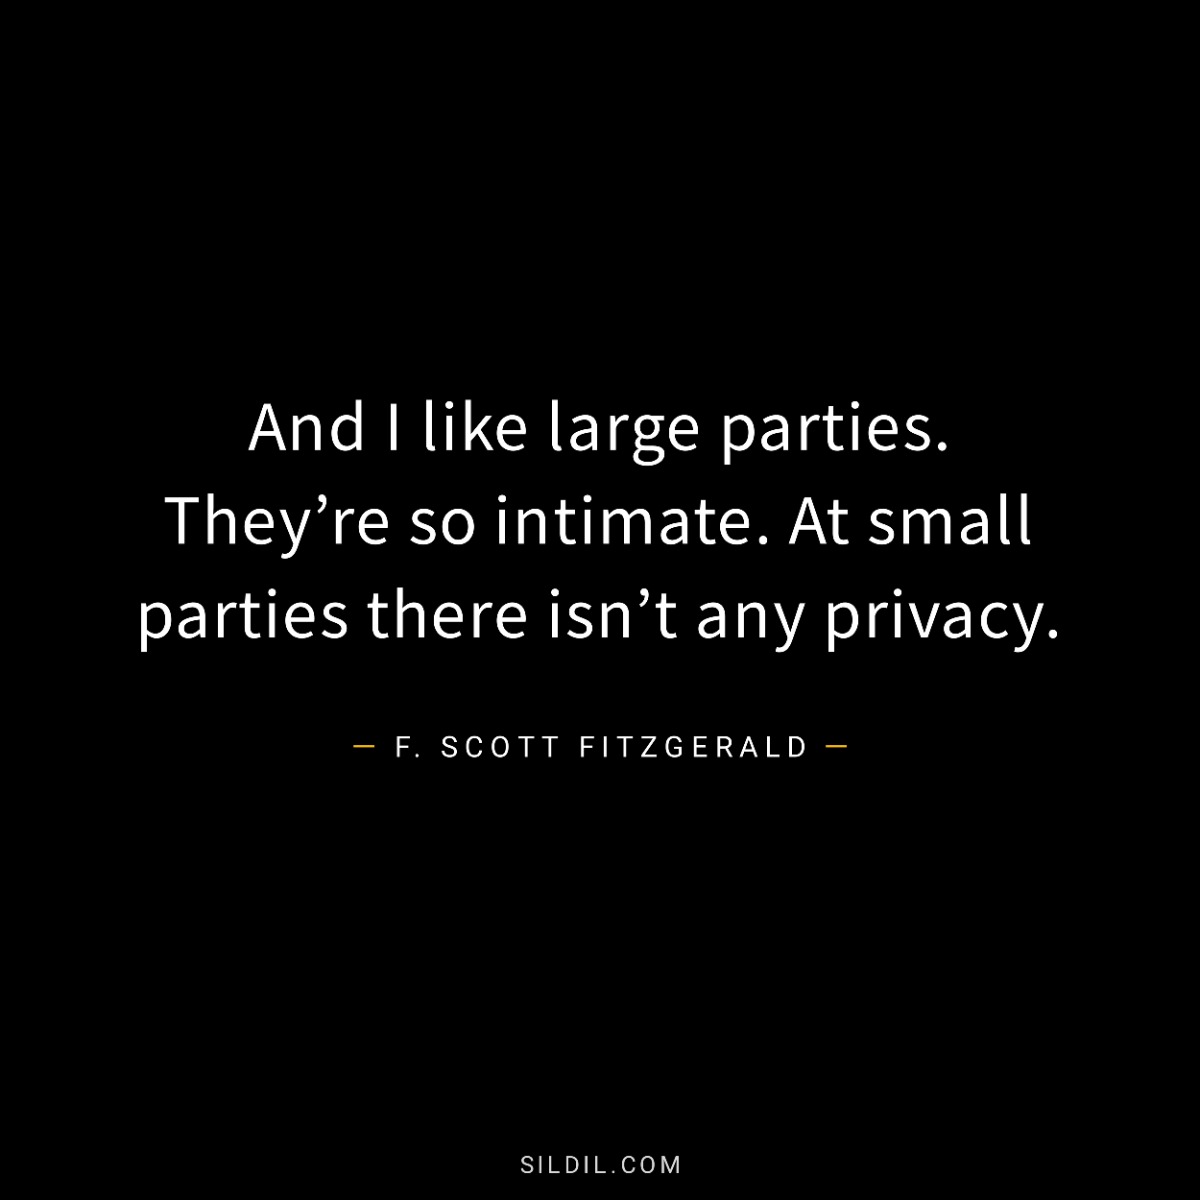 And I like large parties. They’re so intimate. At small parties there isn’t any privacy.